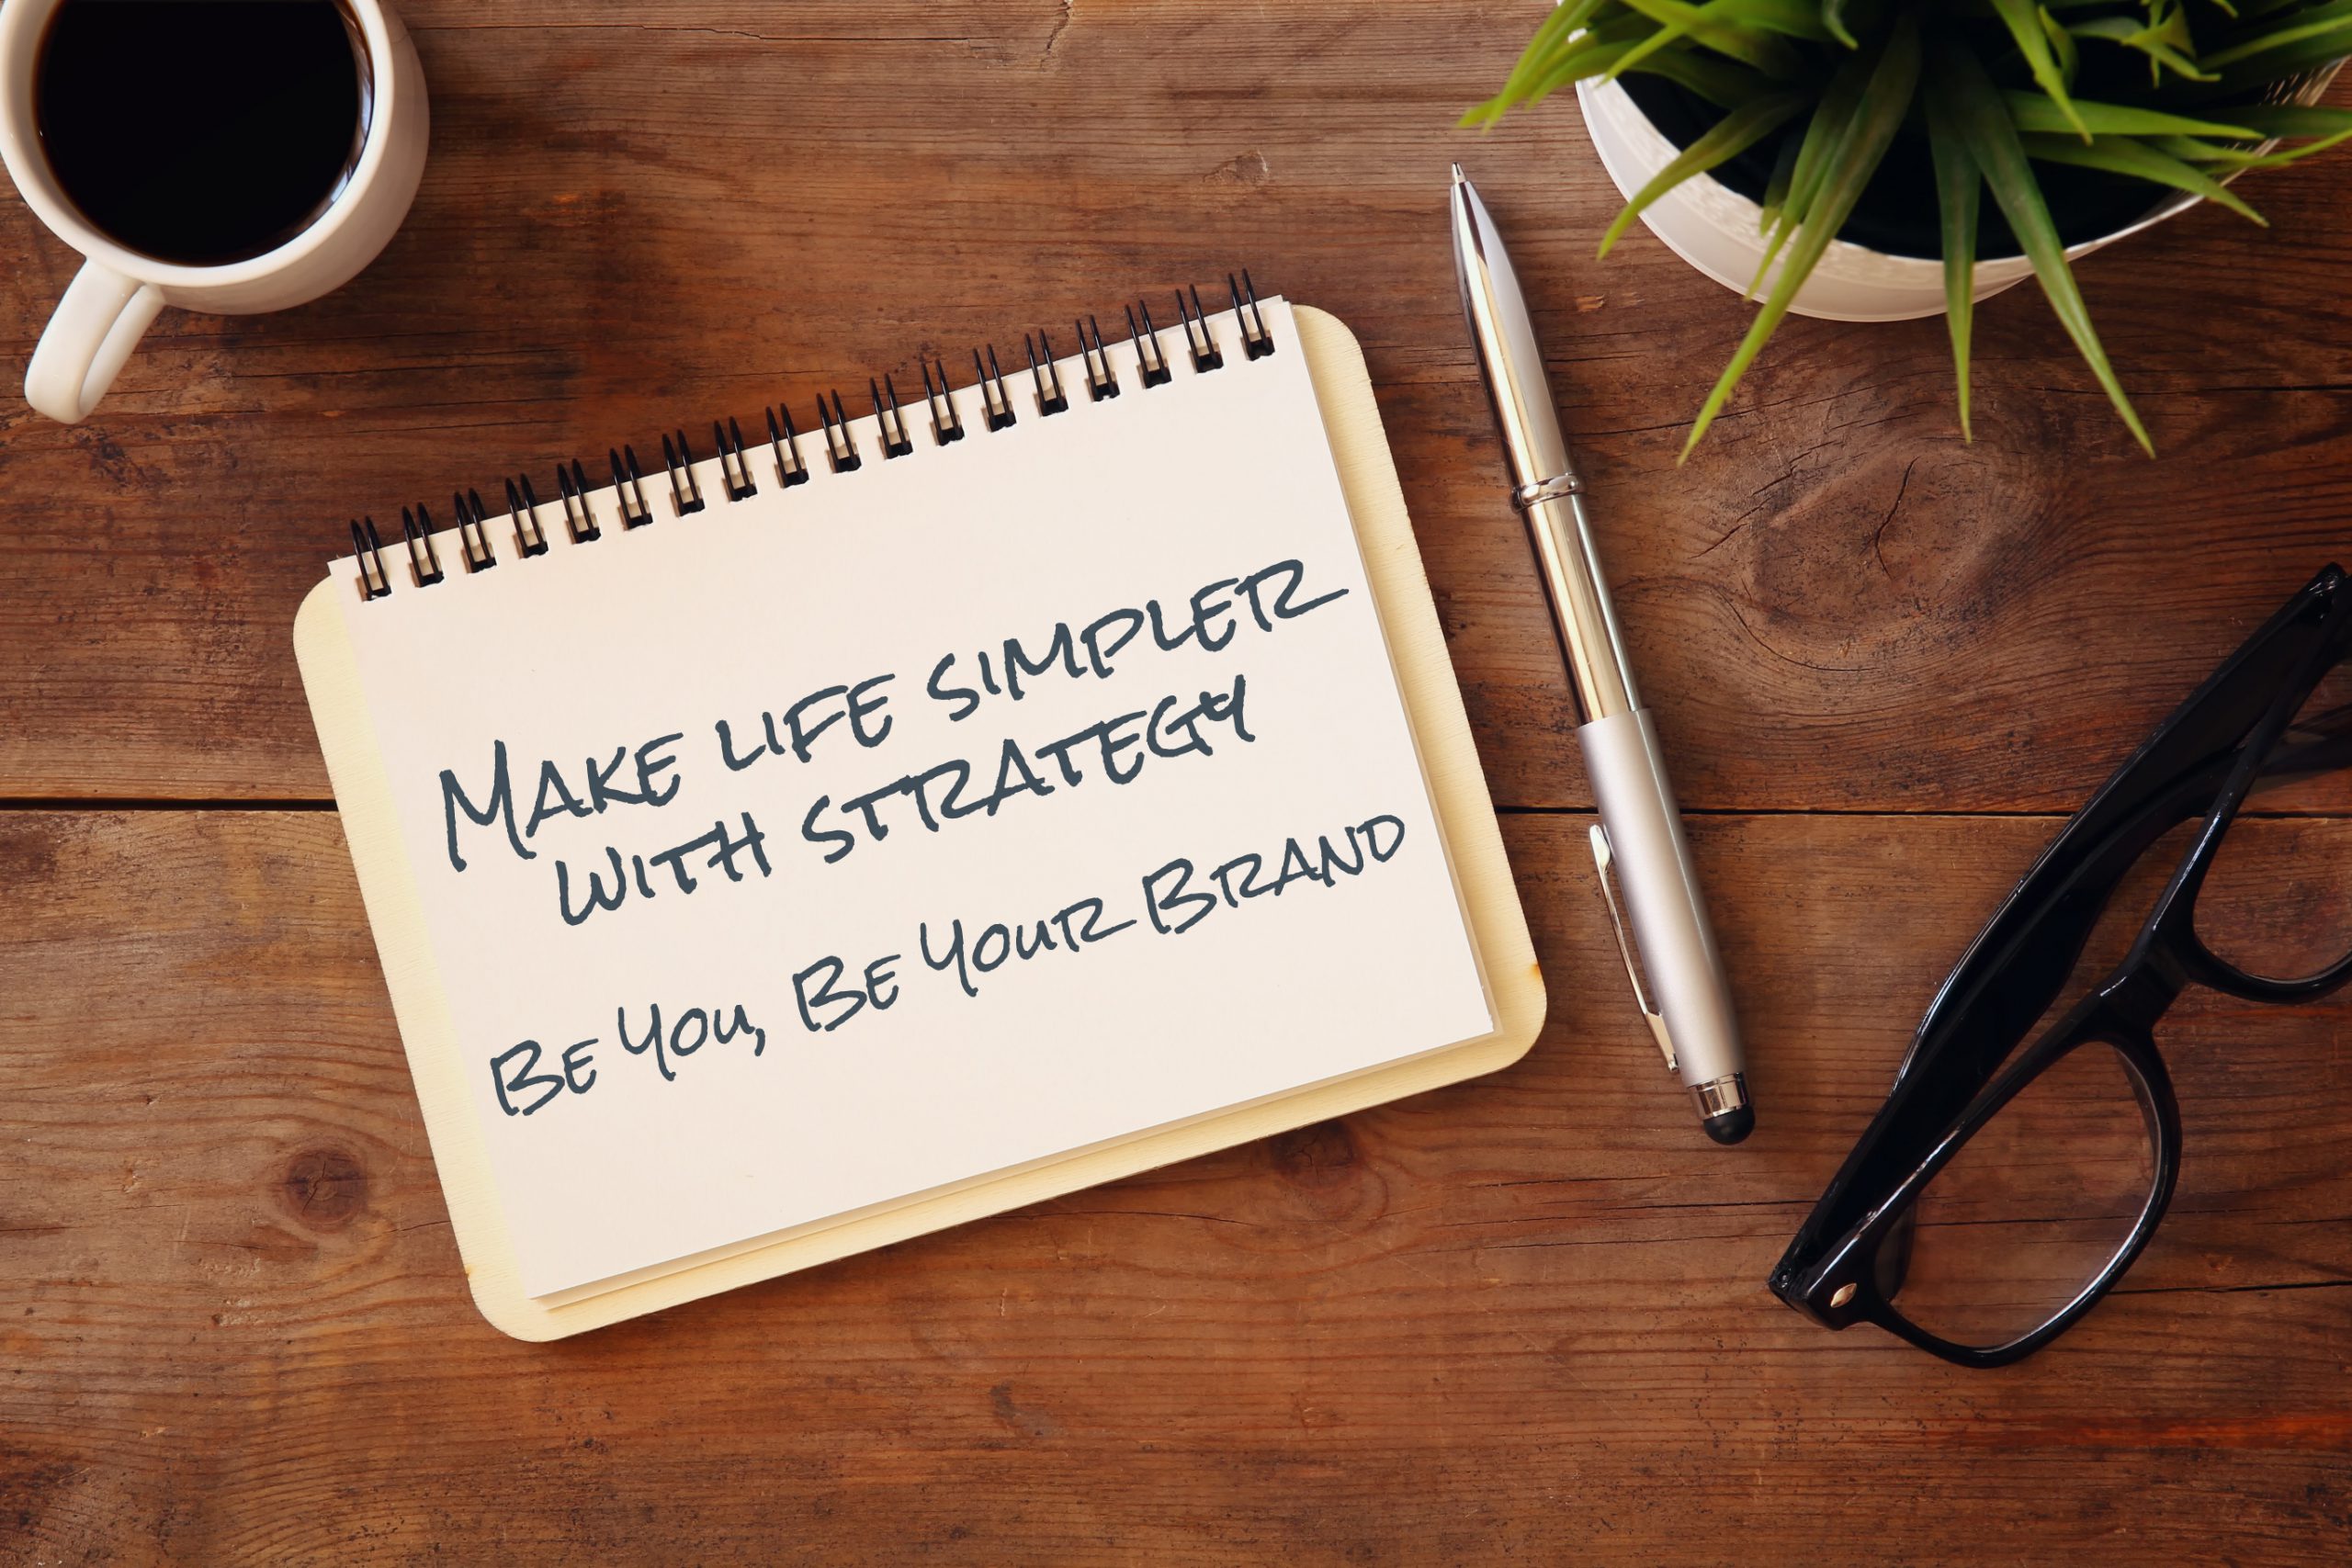 note book that reads make life simpler with strategy